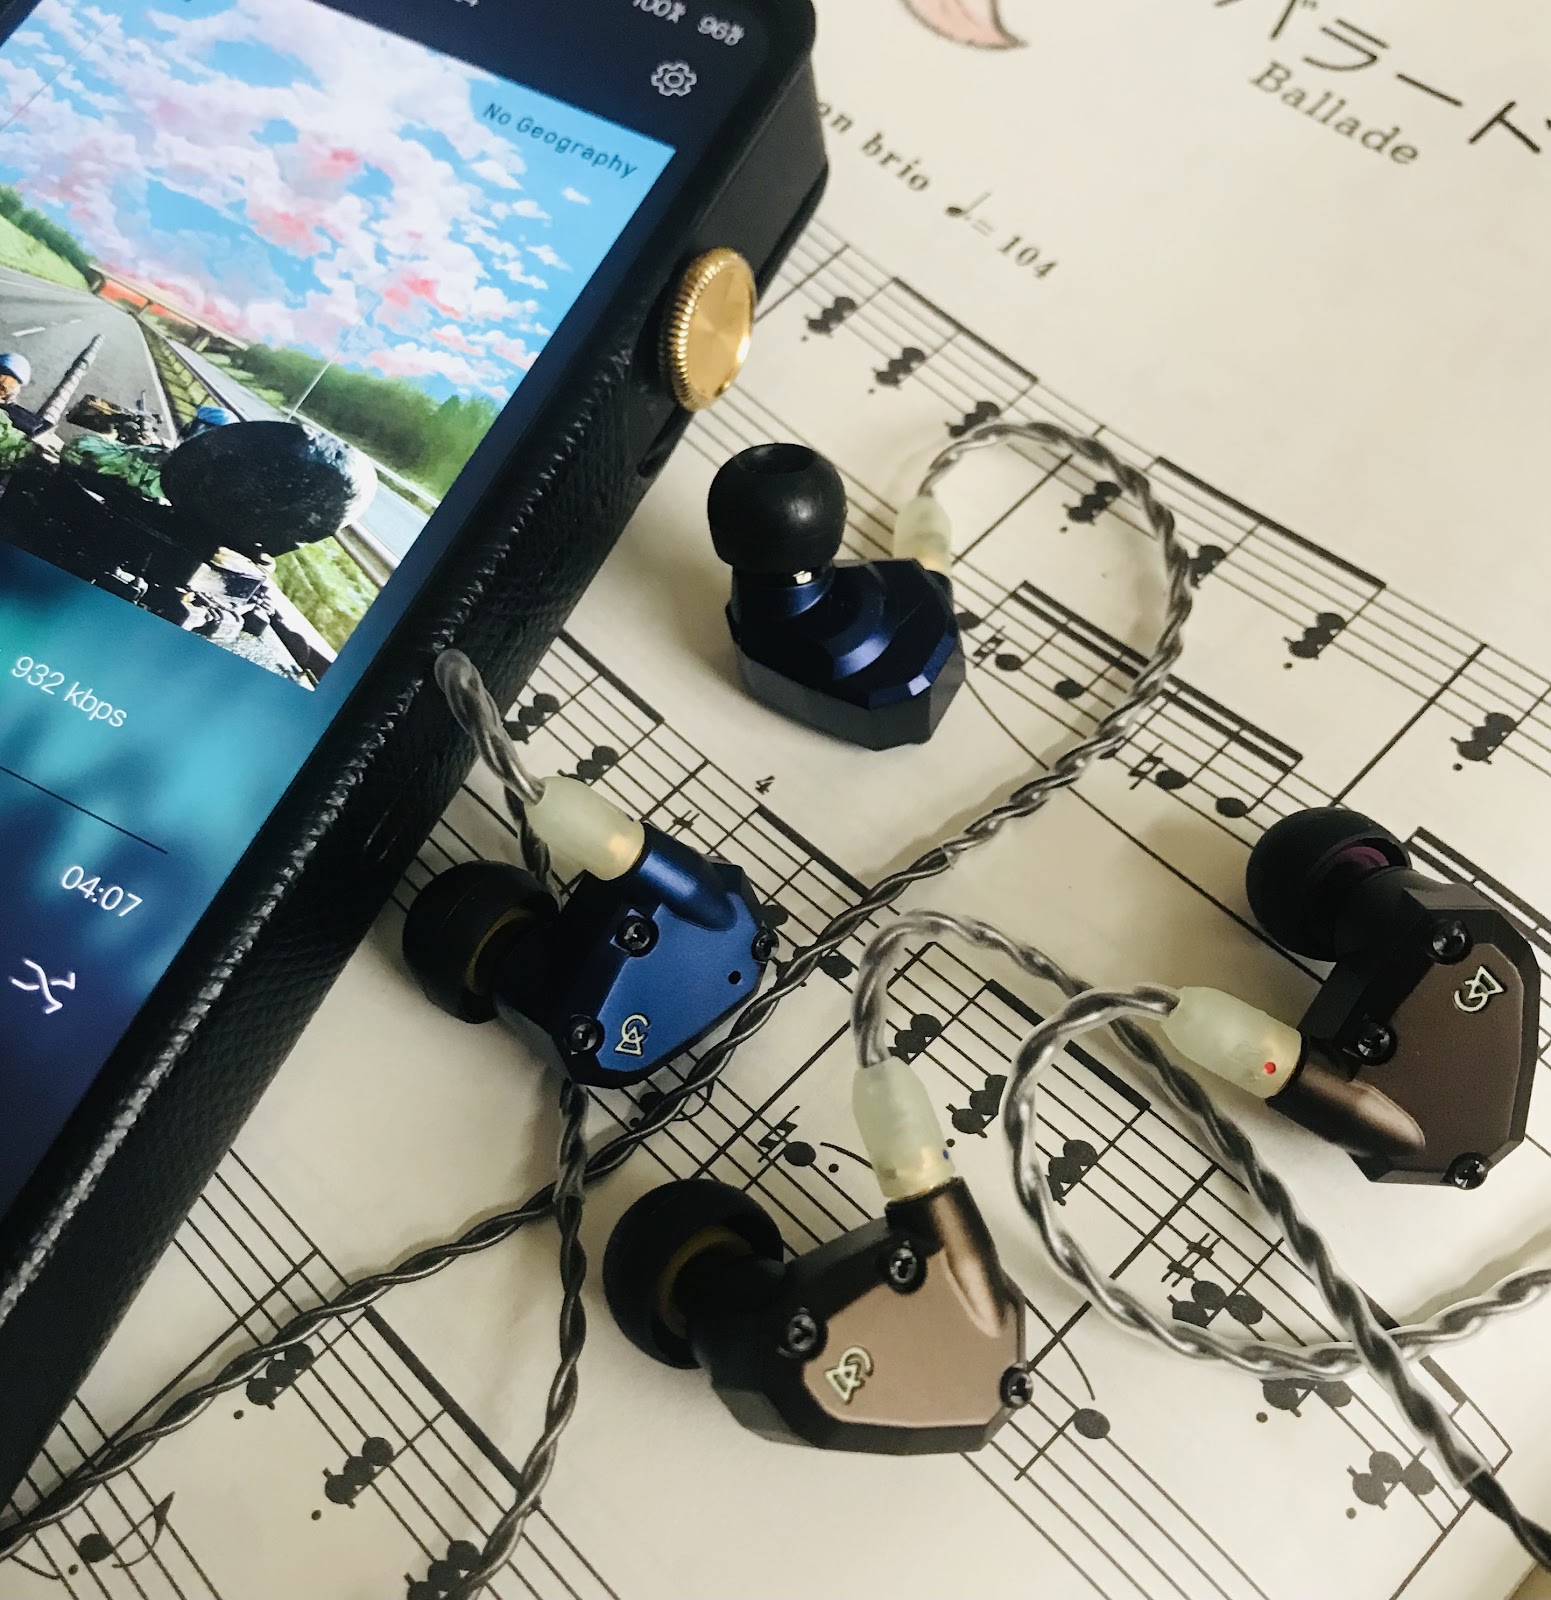 Campfire Audio Holocene | Headphone Reviews and Discussion - Head-Fi.org